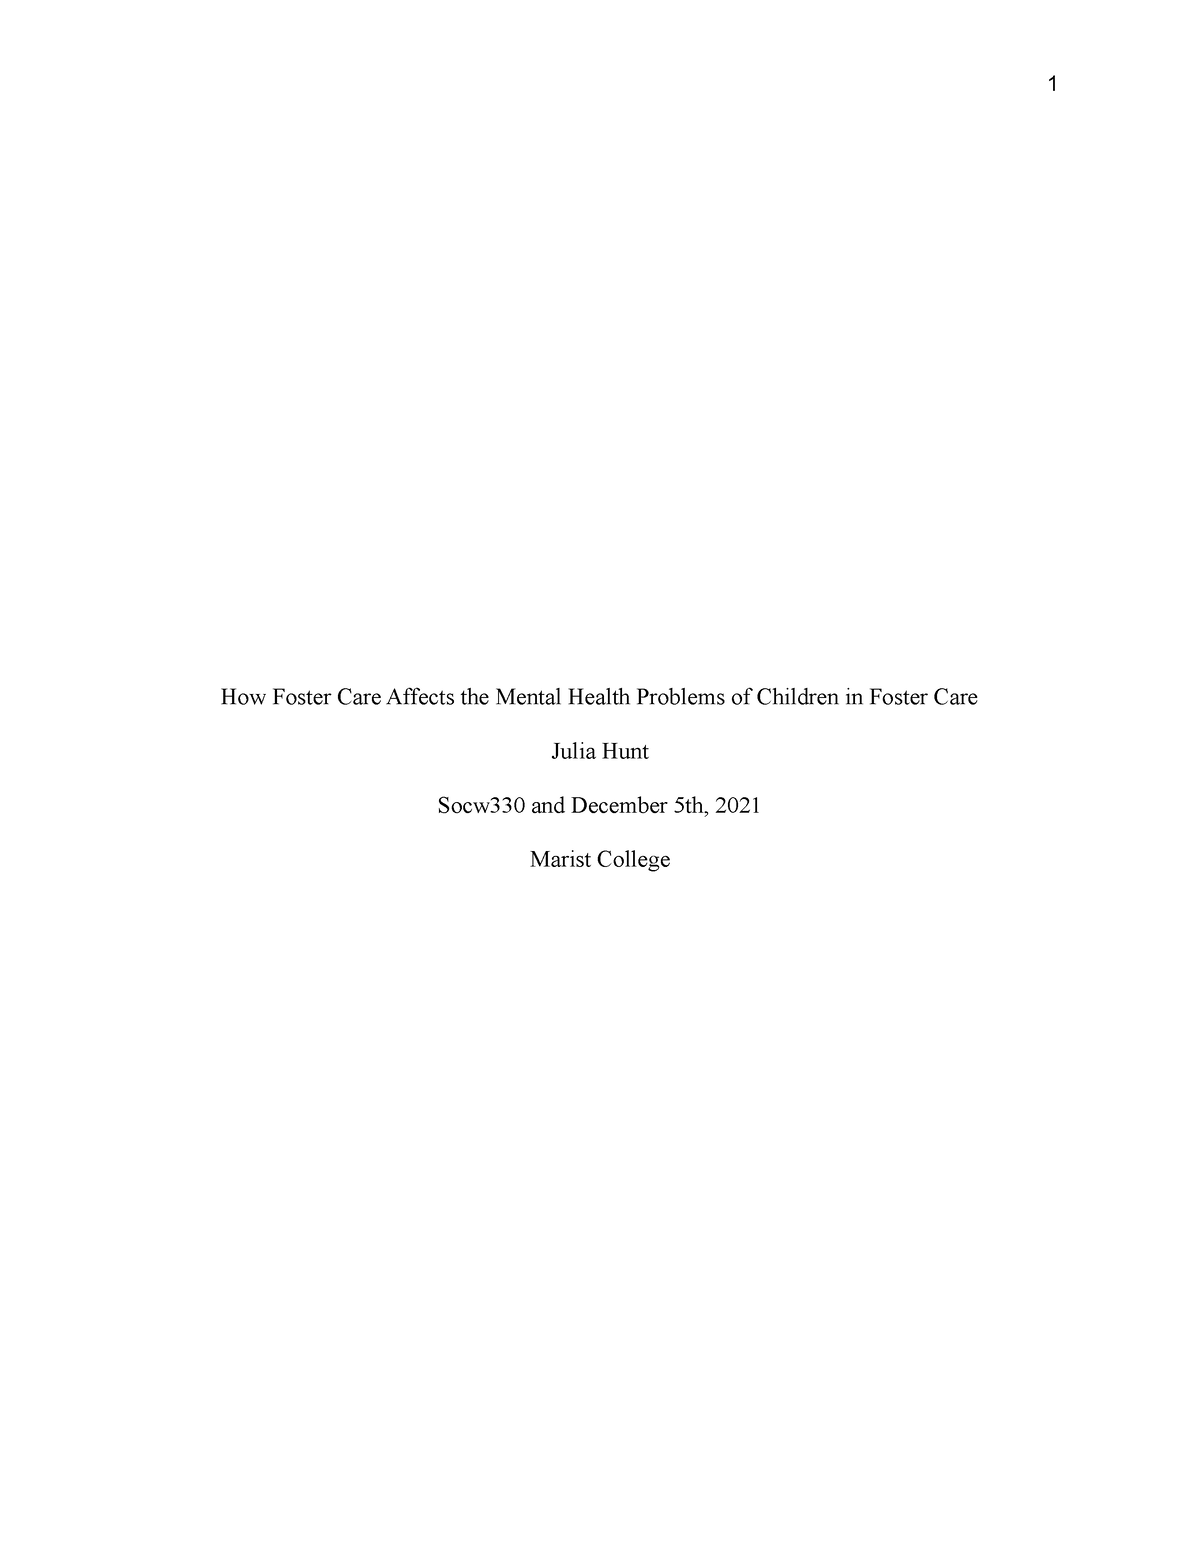 thesis about foster care